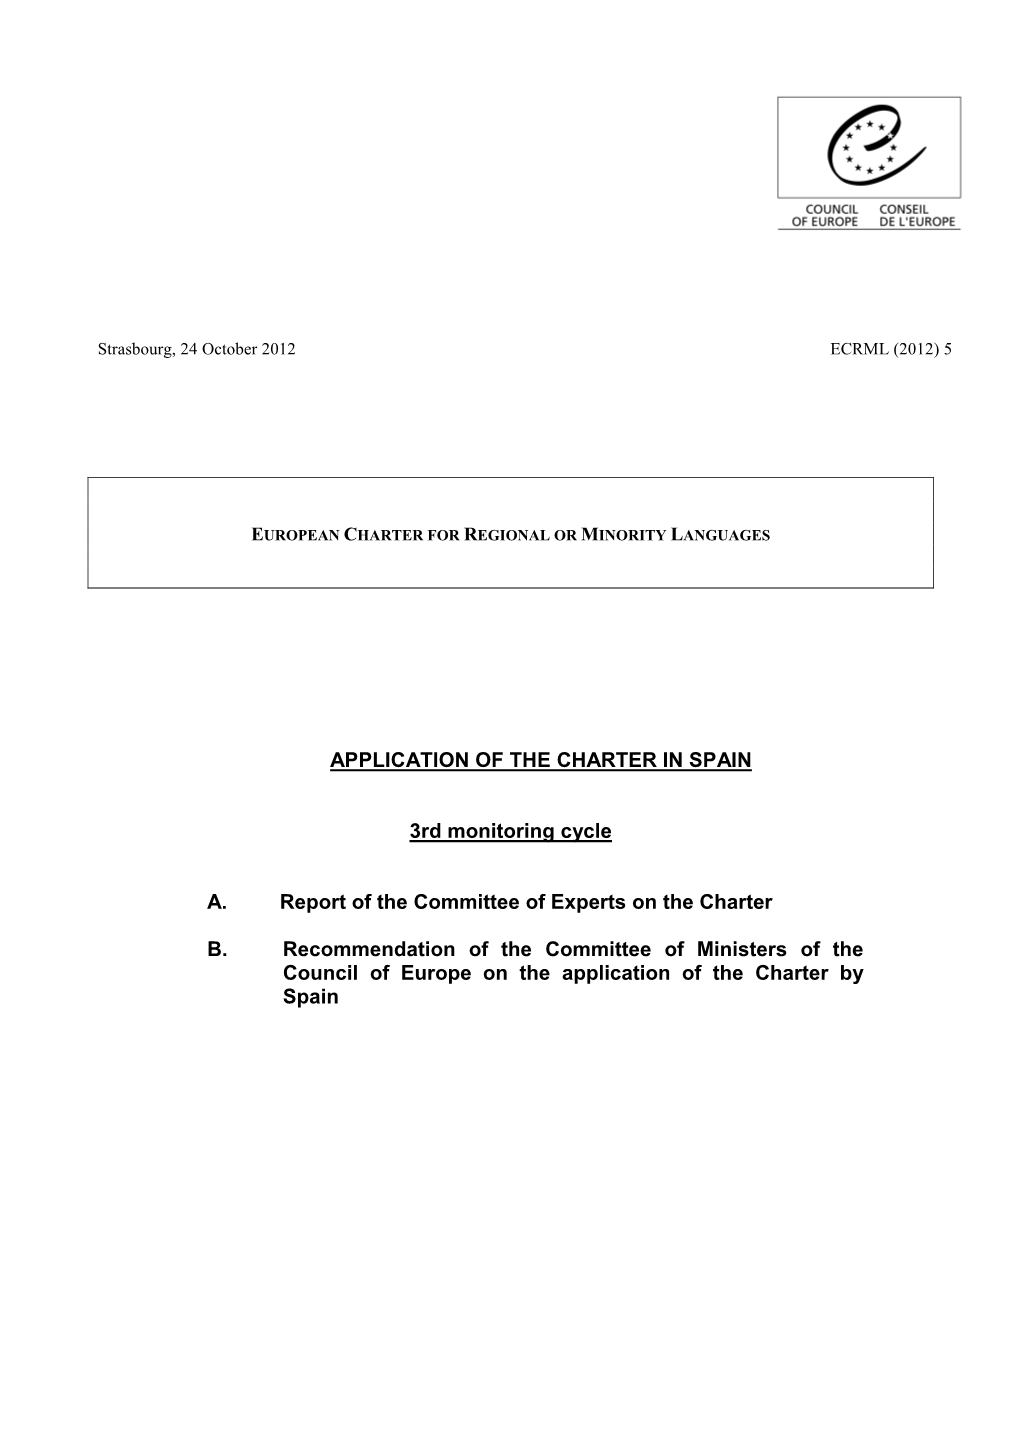 APPLICATION of the CHARTER in SPAIN 3Rd Monitoring Cycle A